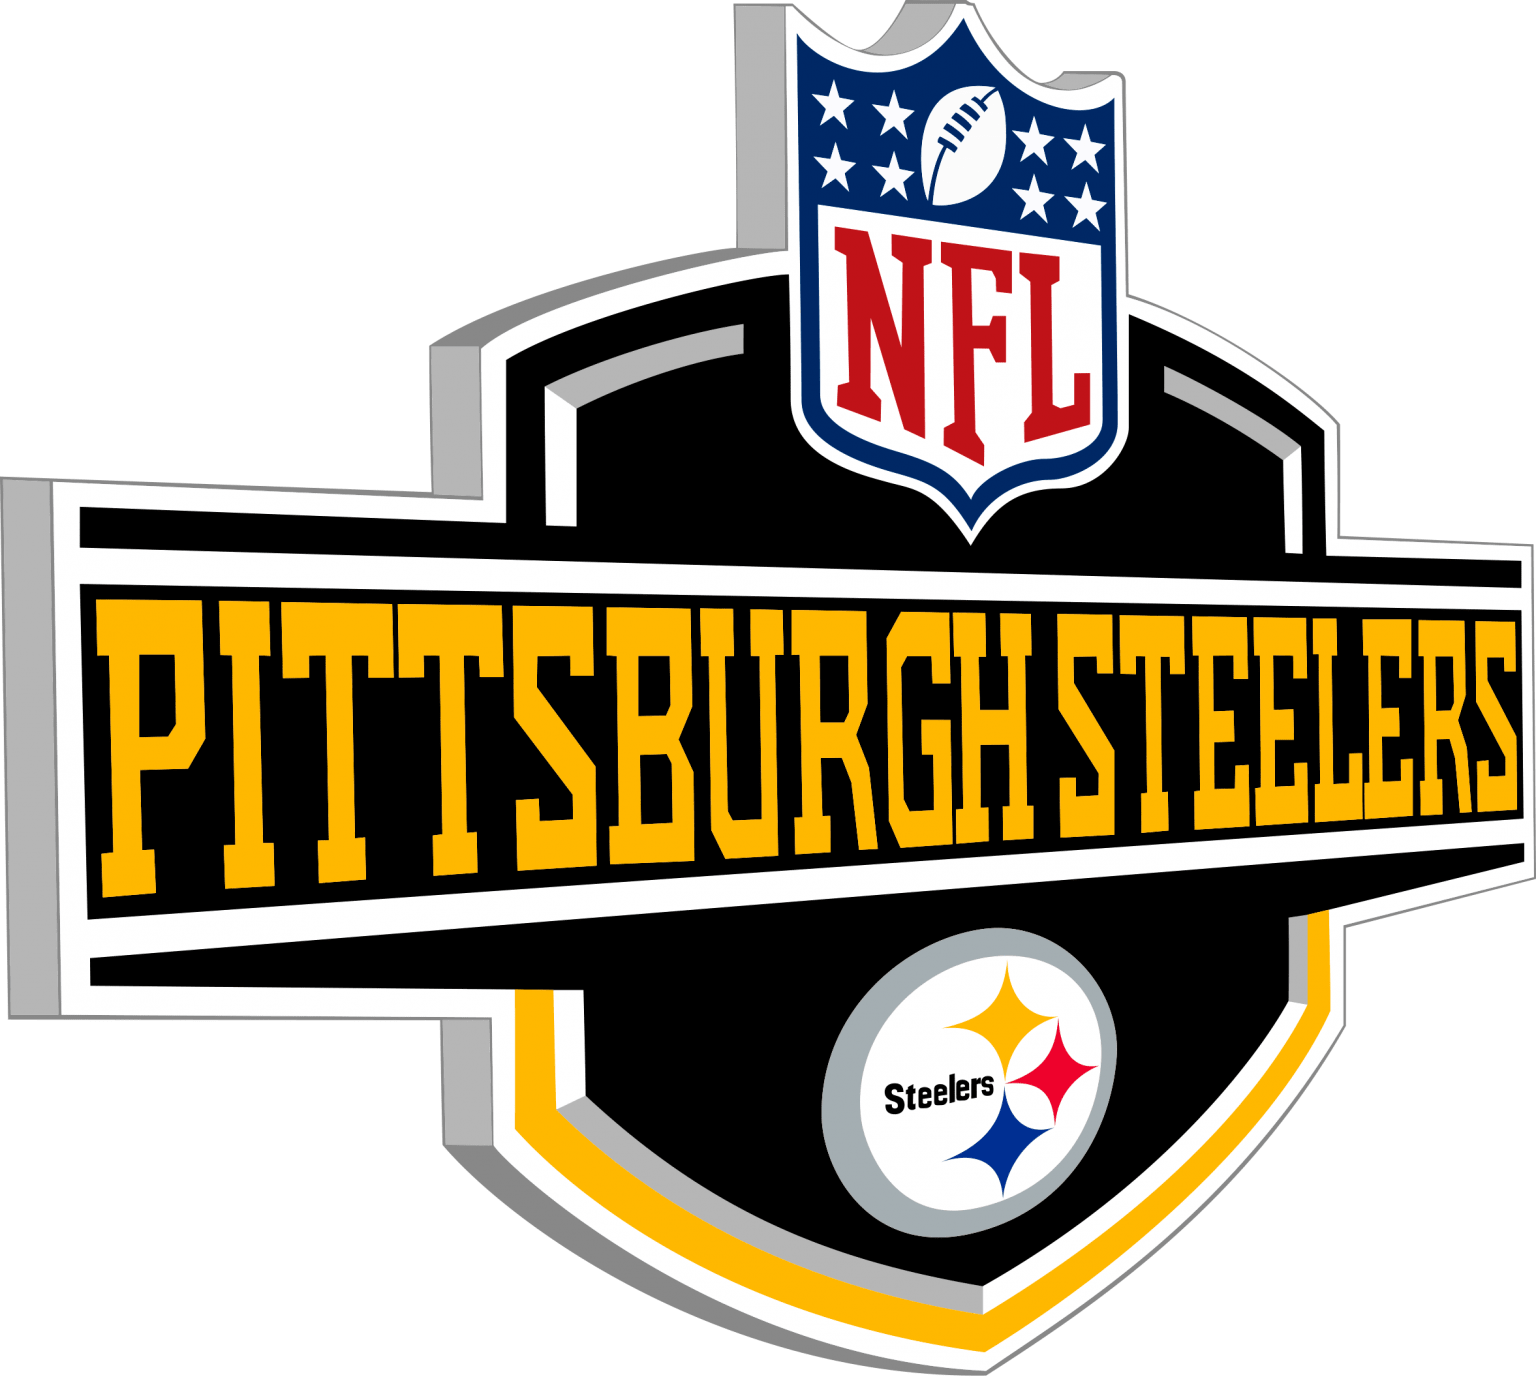 Pittsburgh Steelers Png - Free Logo Image